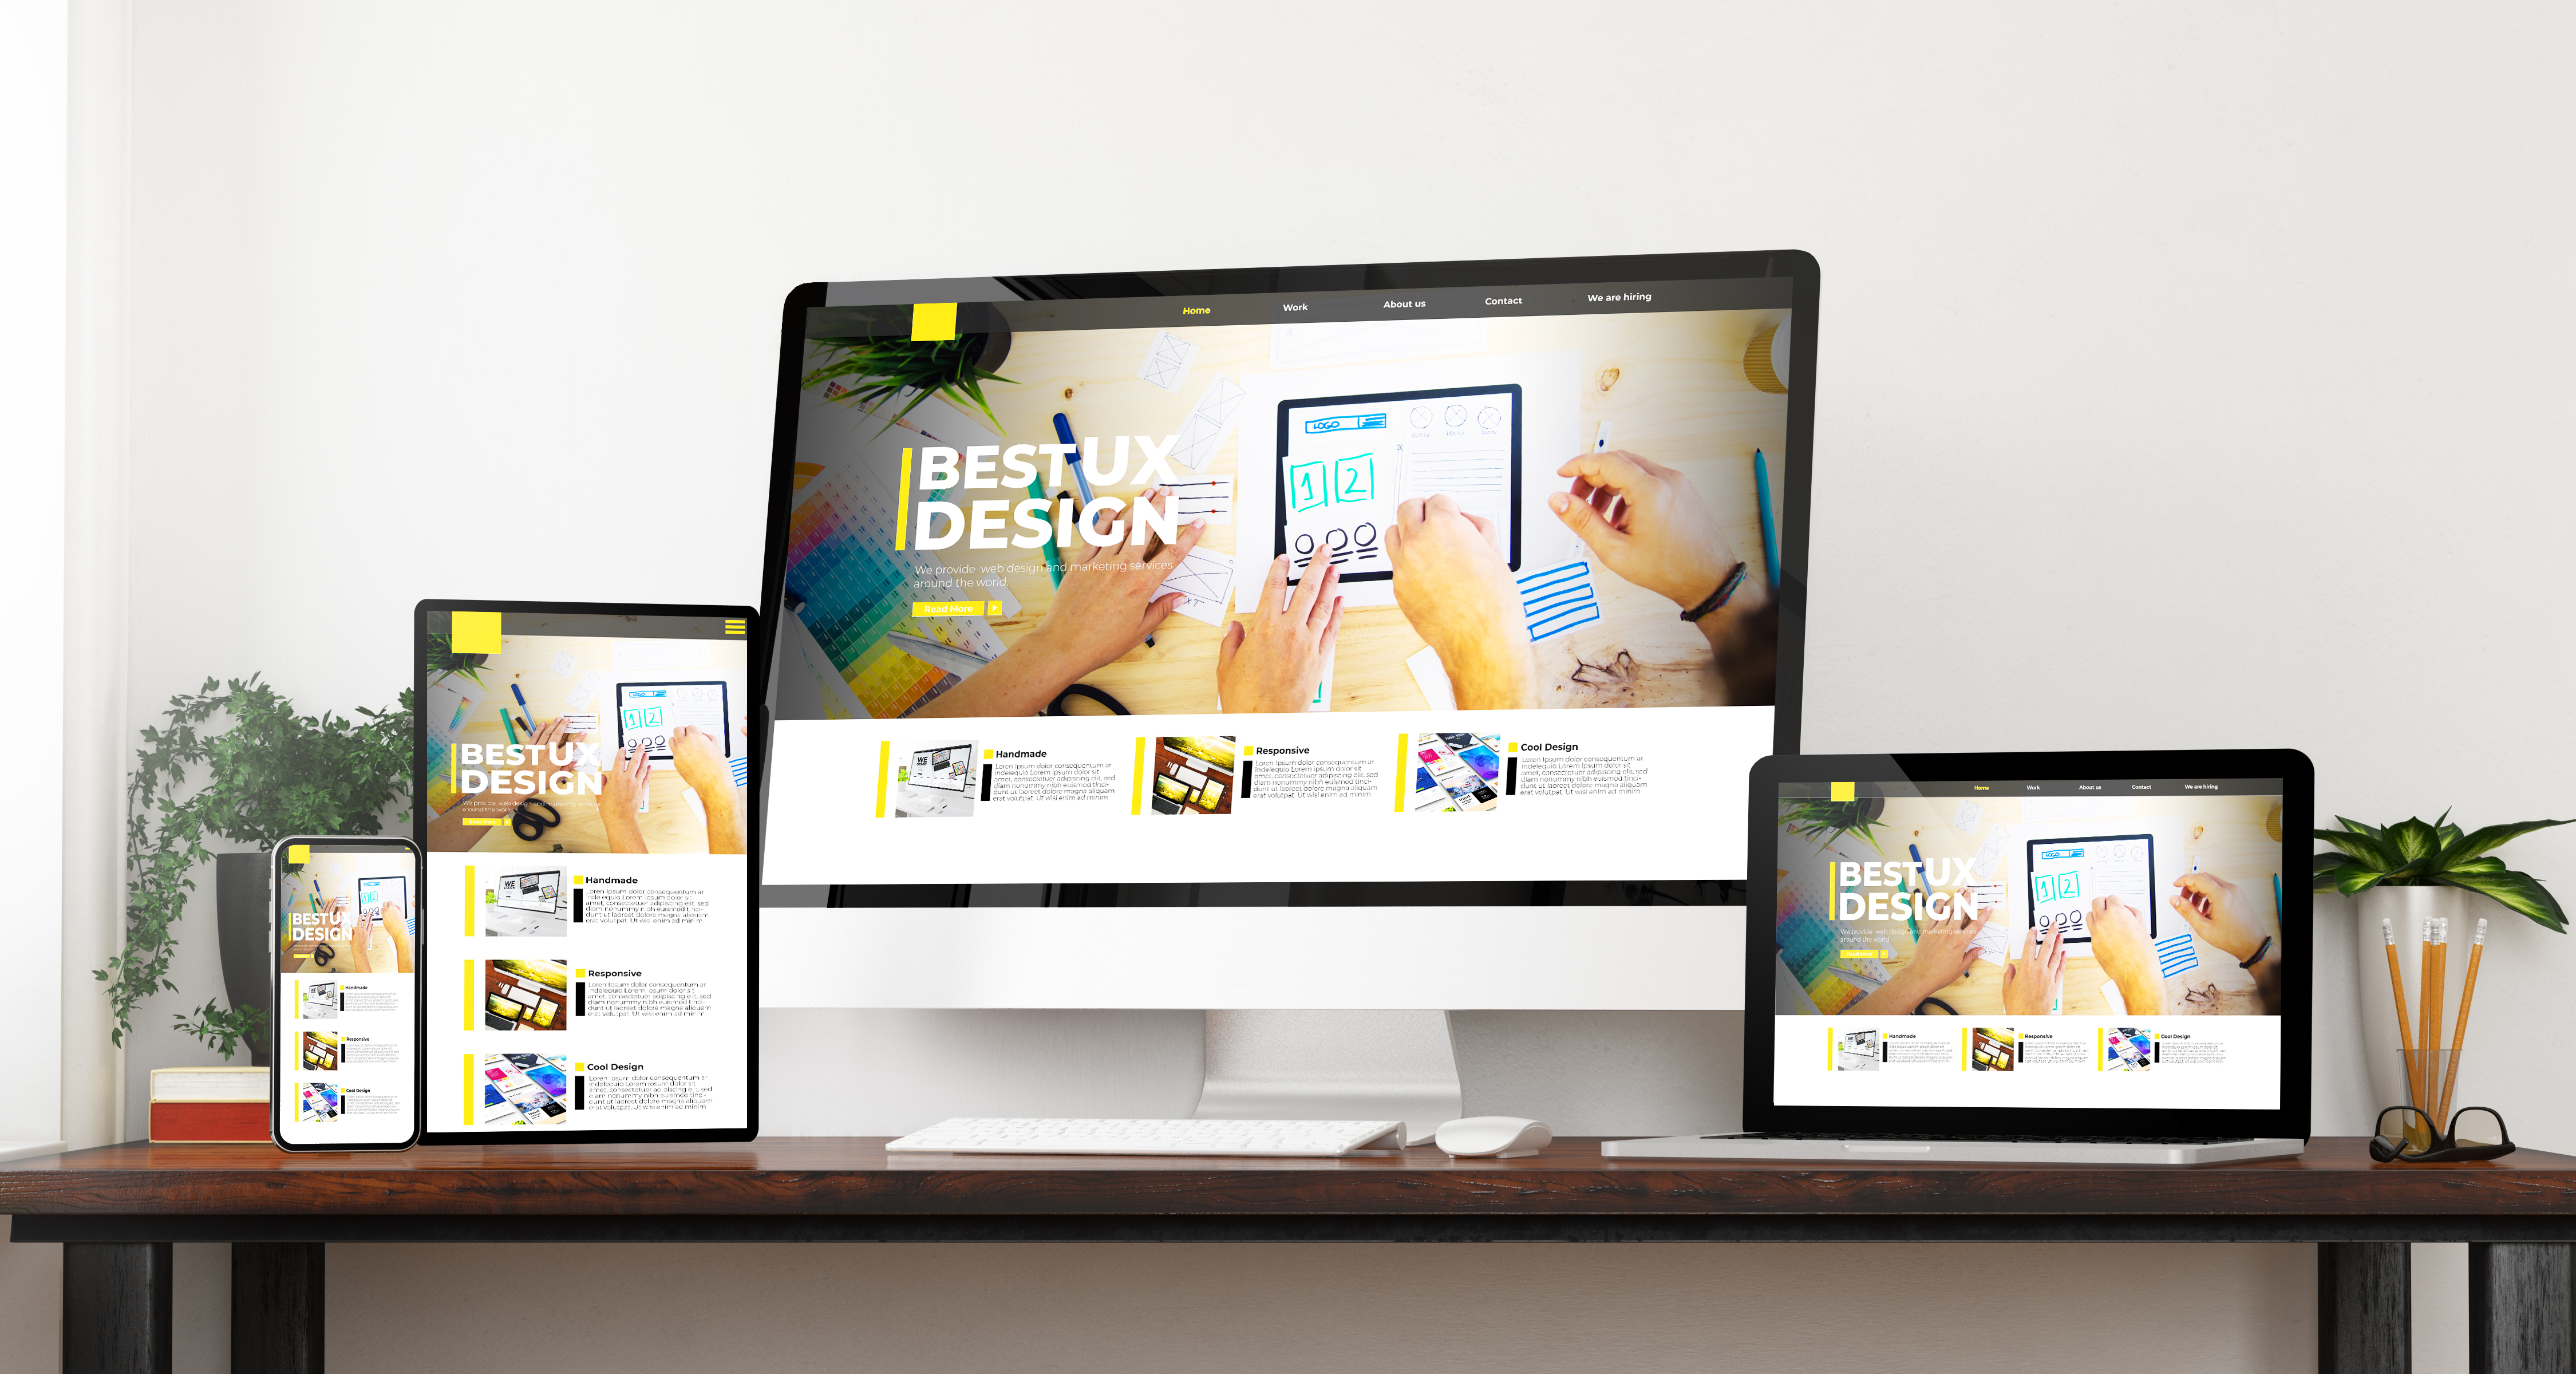 How important is Responsive Design?